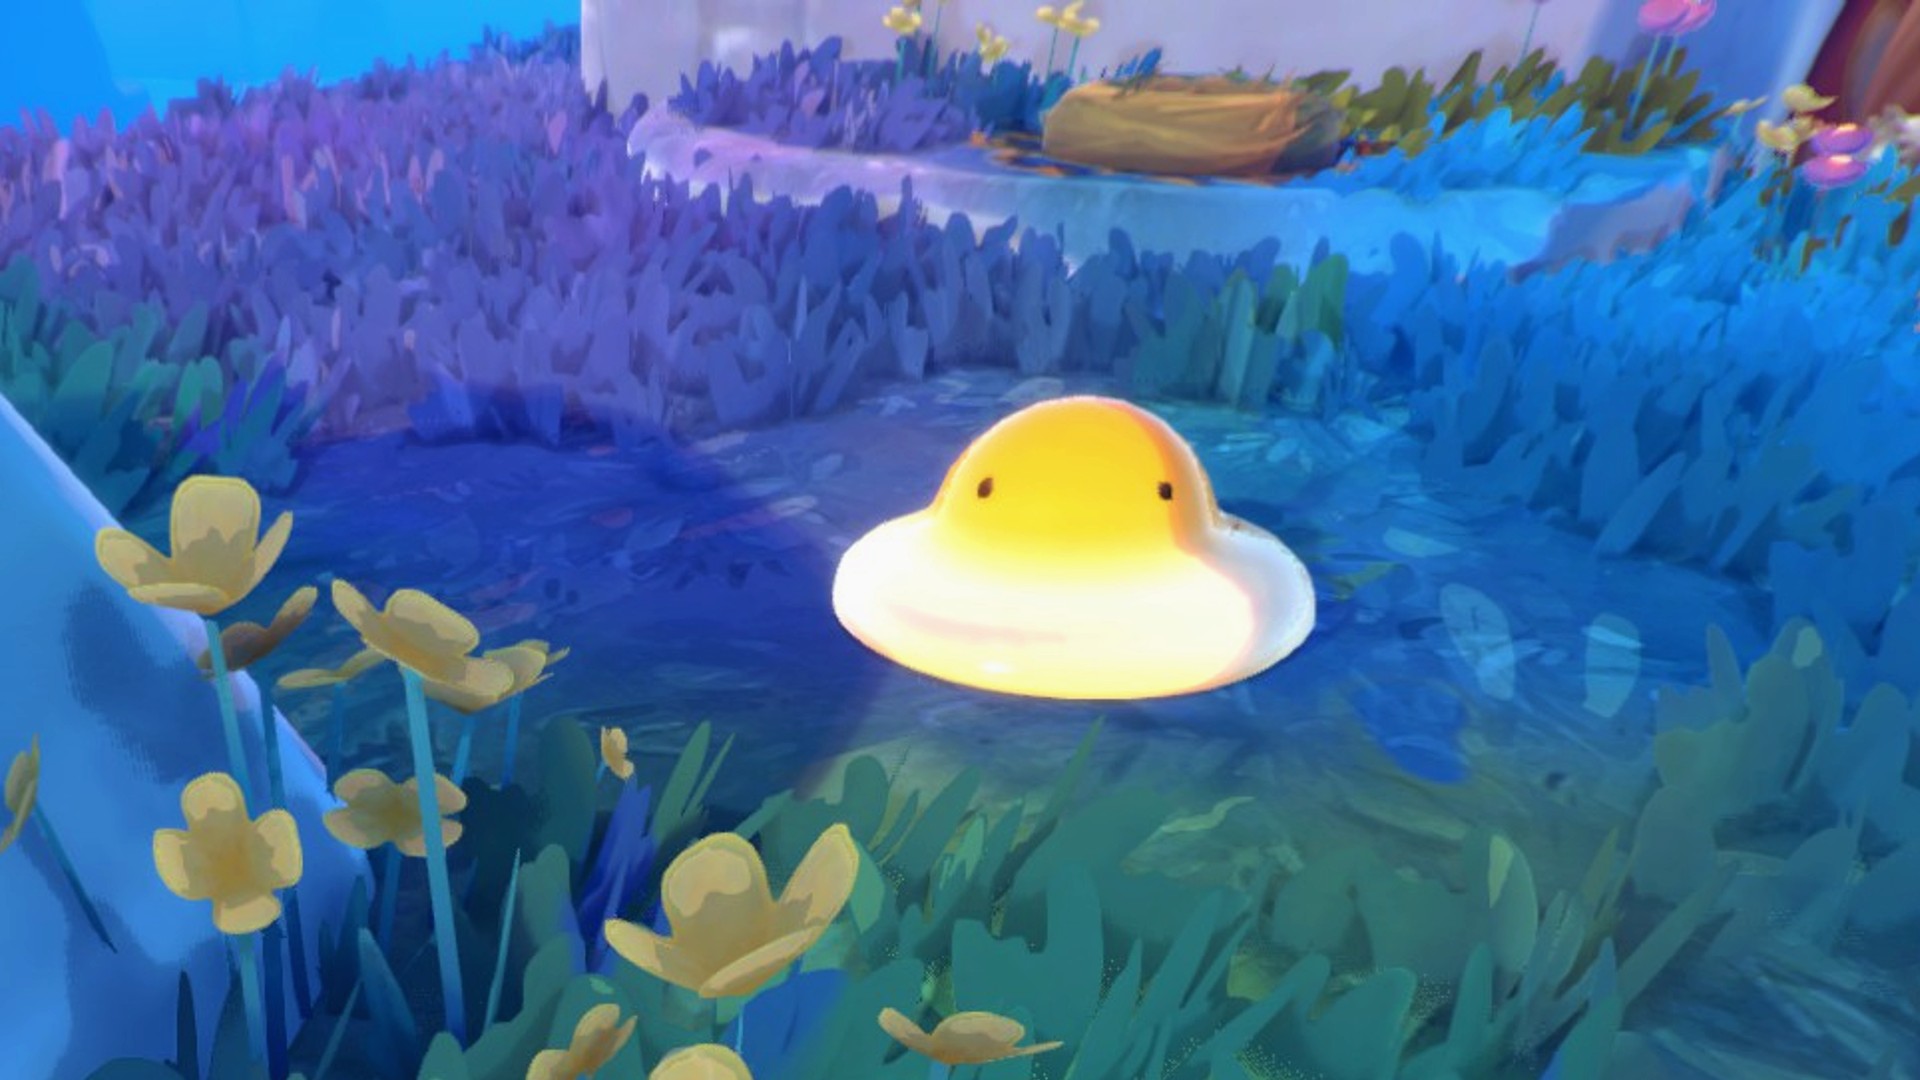 Content Updates 2 and 3 for Slime Rancher 2 - Slime Rancher 2